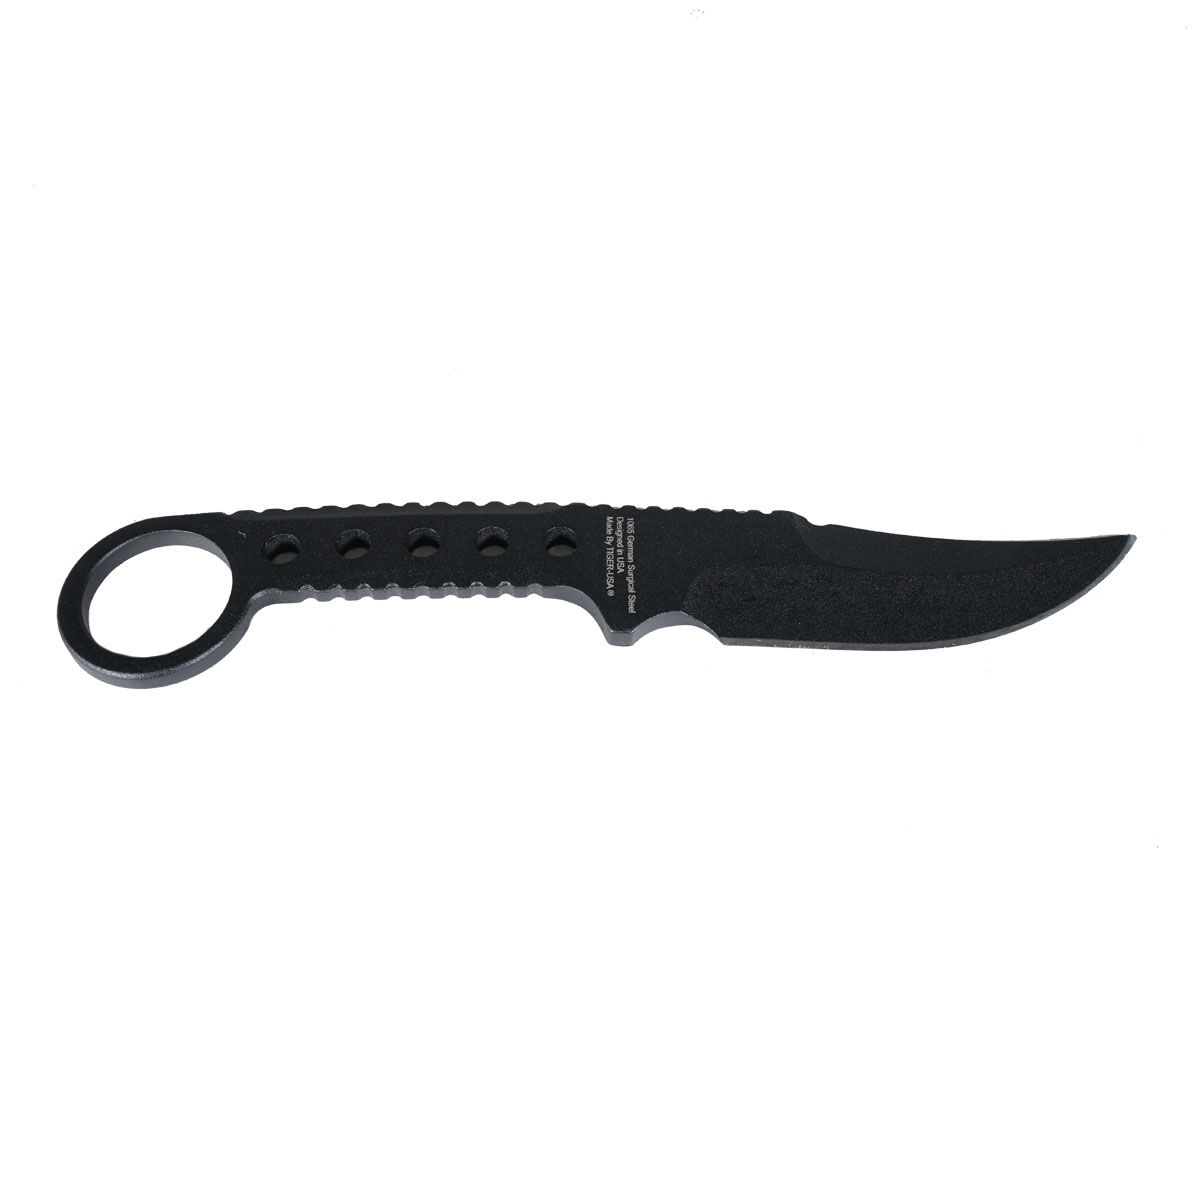 Tiger USA Boot Knife Single-Edged Black Full Tang with Clip